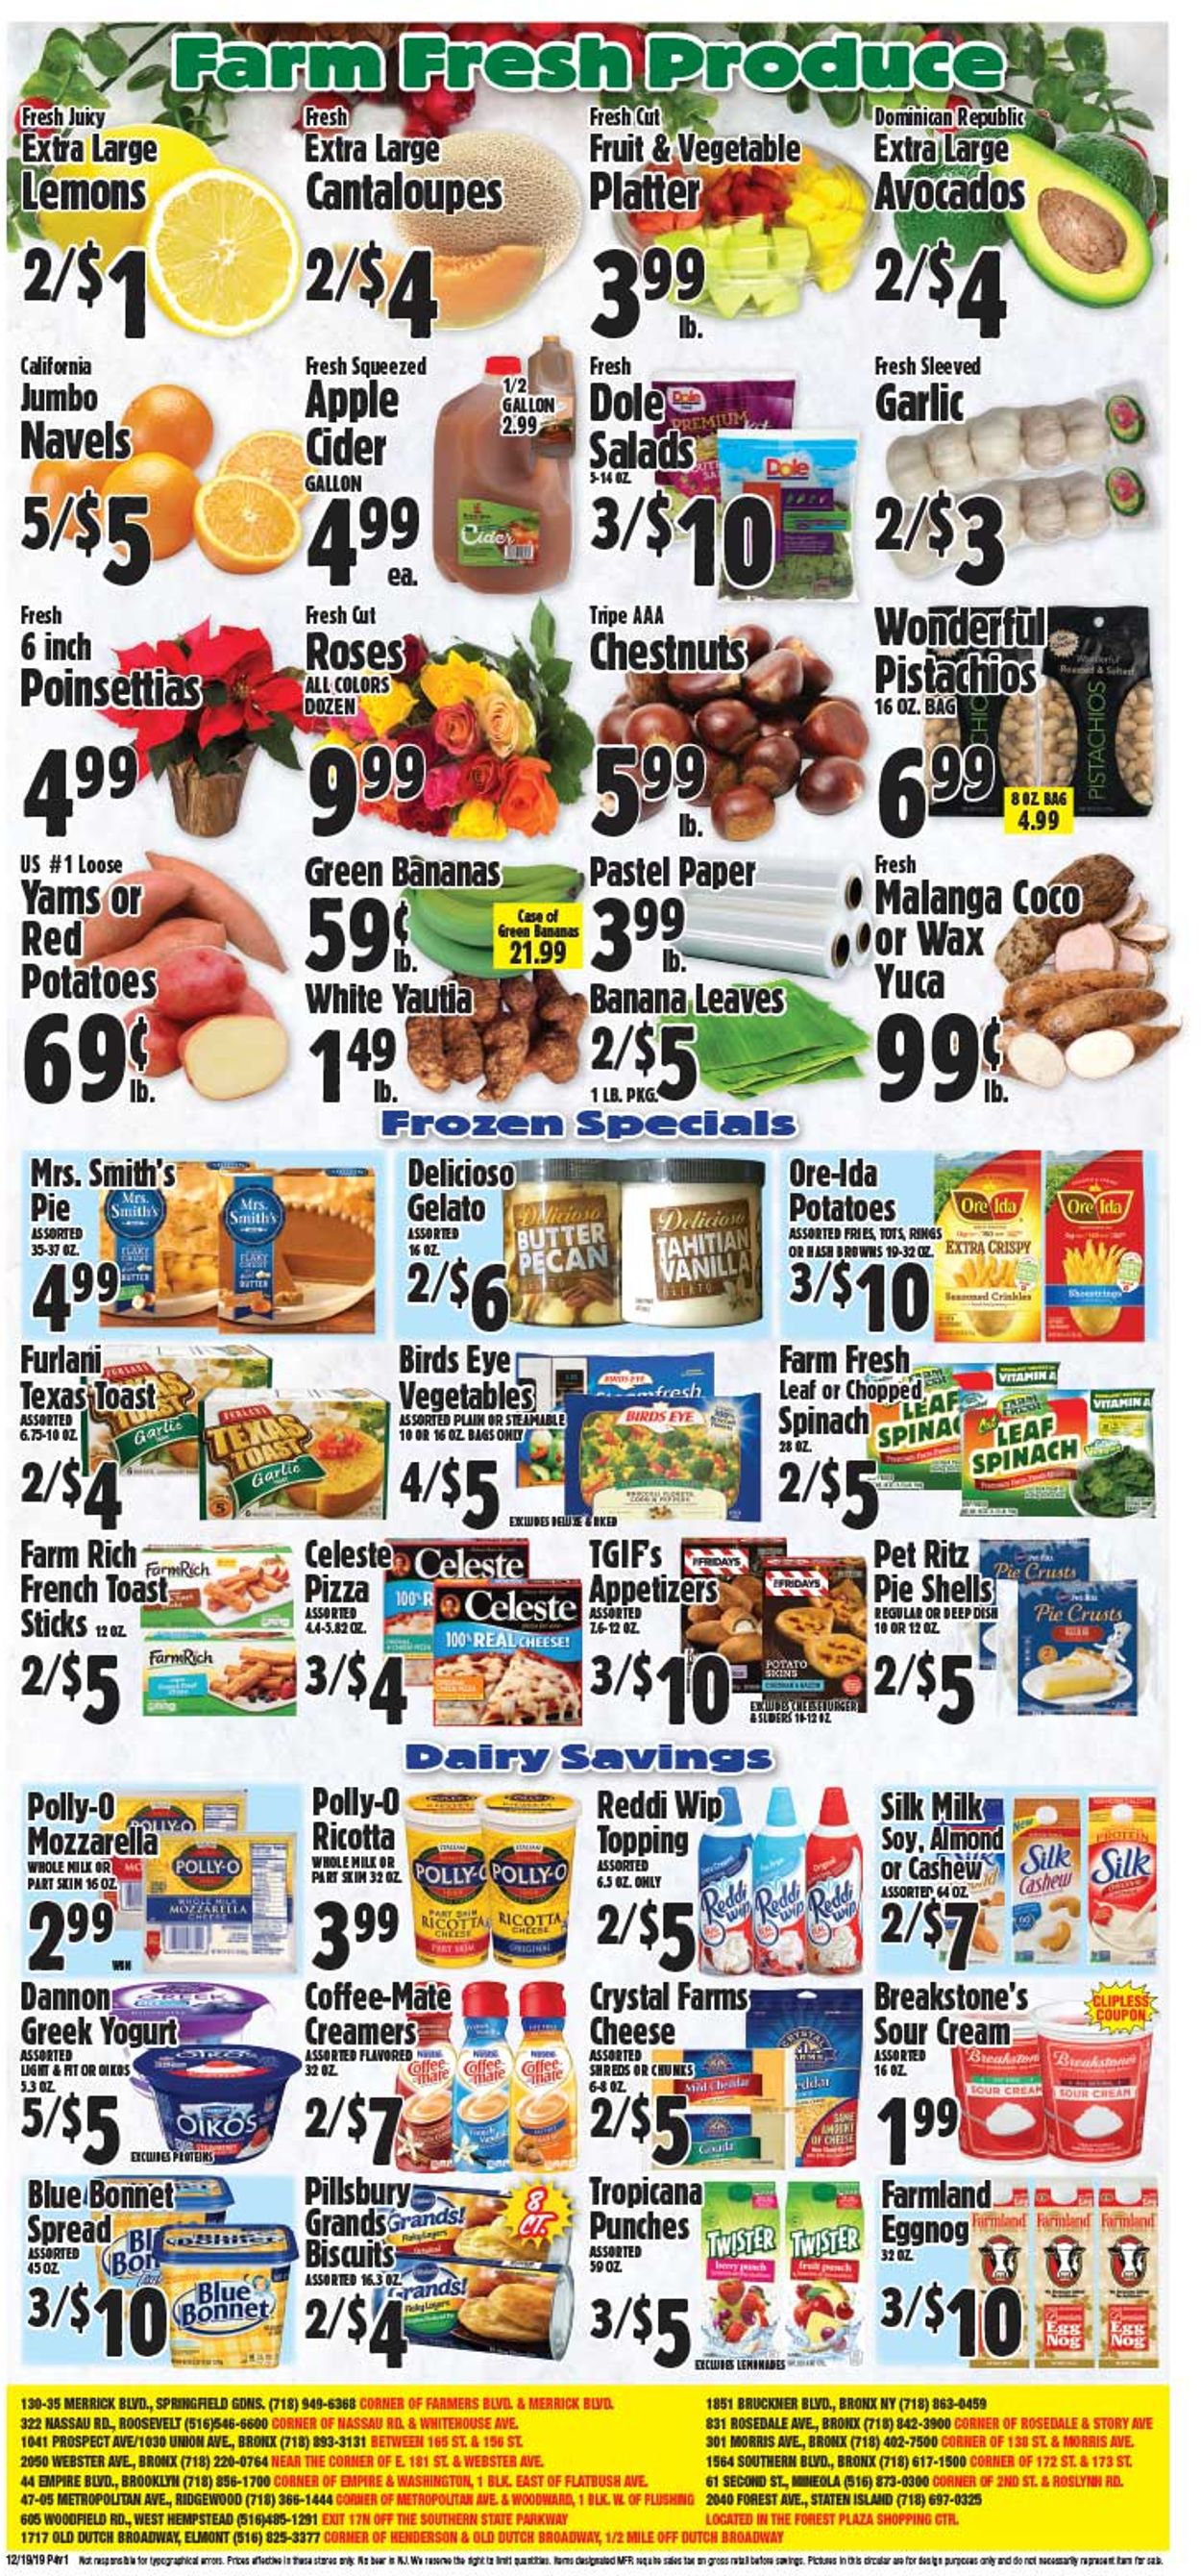 Catalogue Western Beef - Holidays Ad 2019 from 12/19/2019